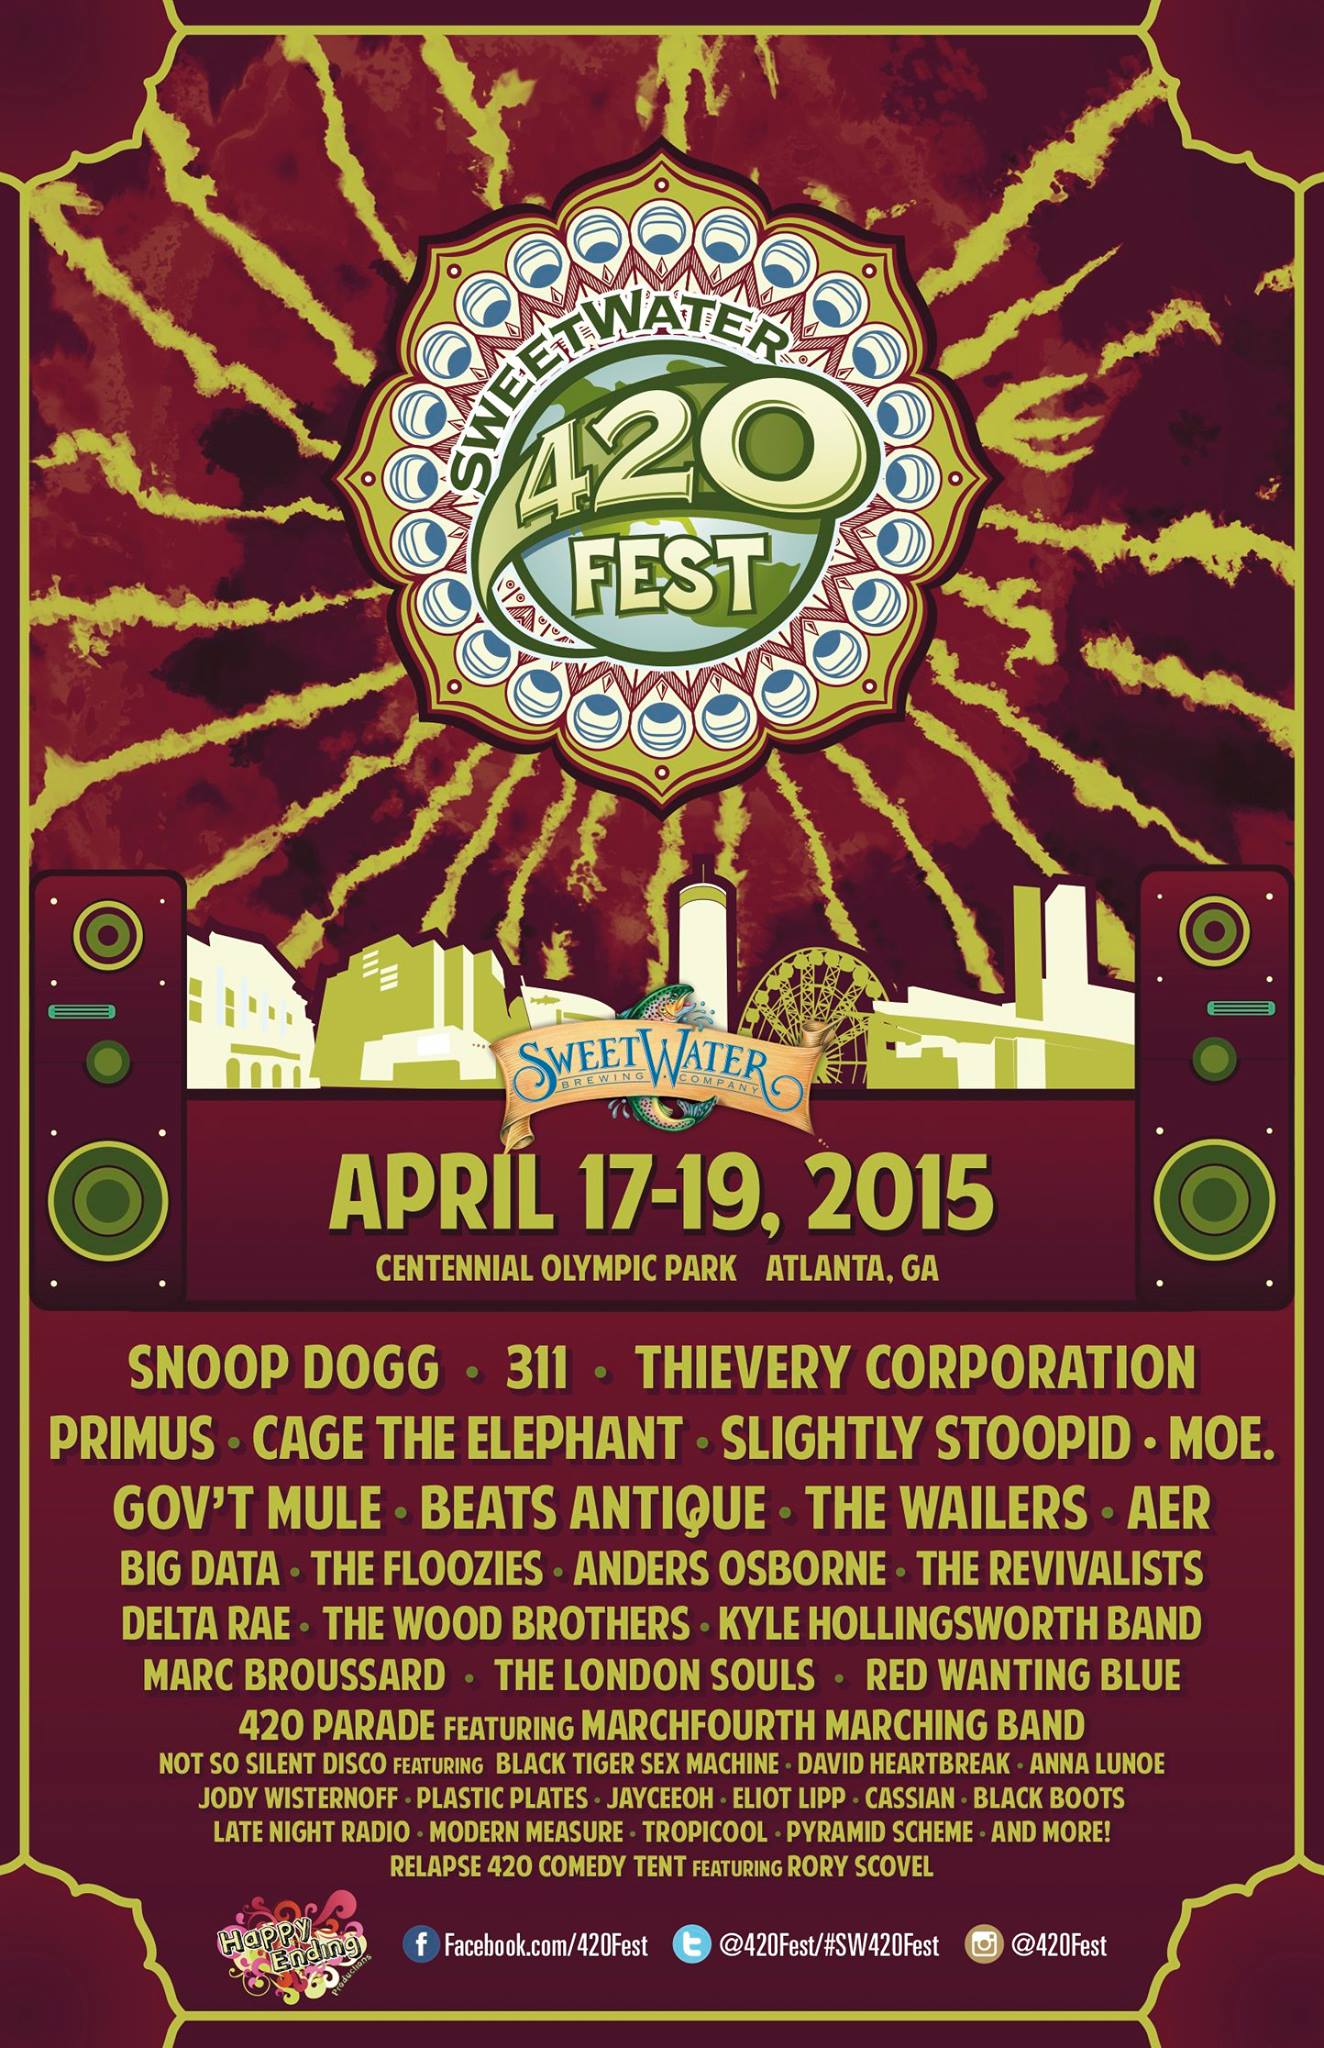 Full Sweetwater 420 Fest Lineup